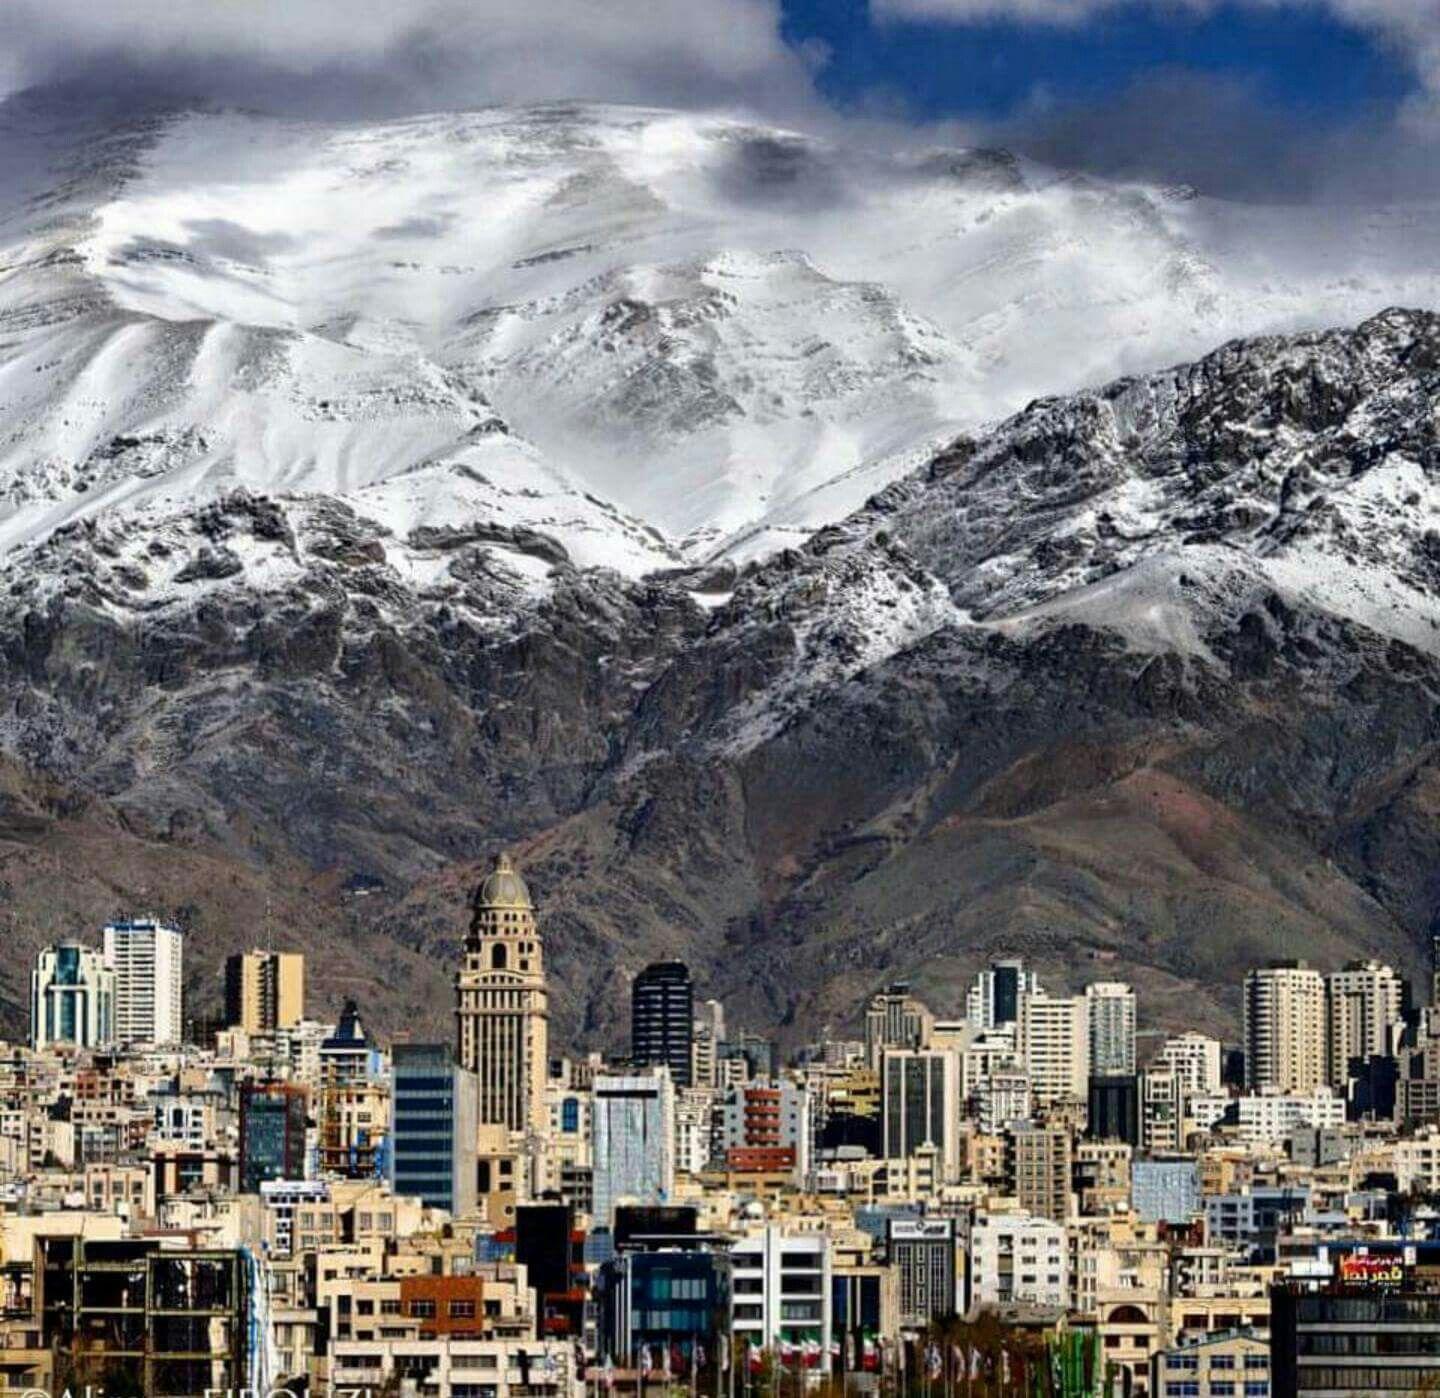 Tehran #iran #wallpaper. Wallpaper for PC, Android devices and etc